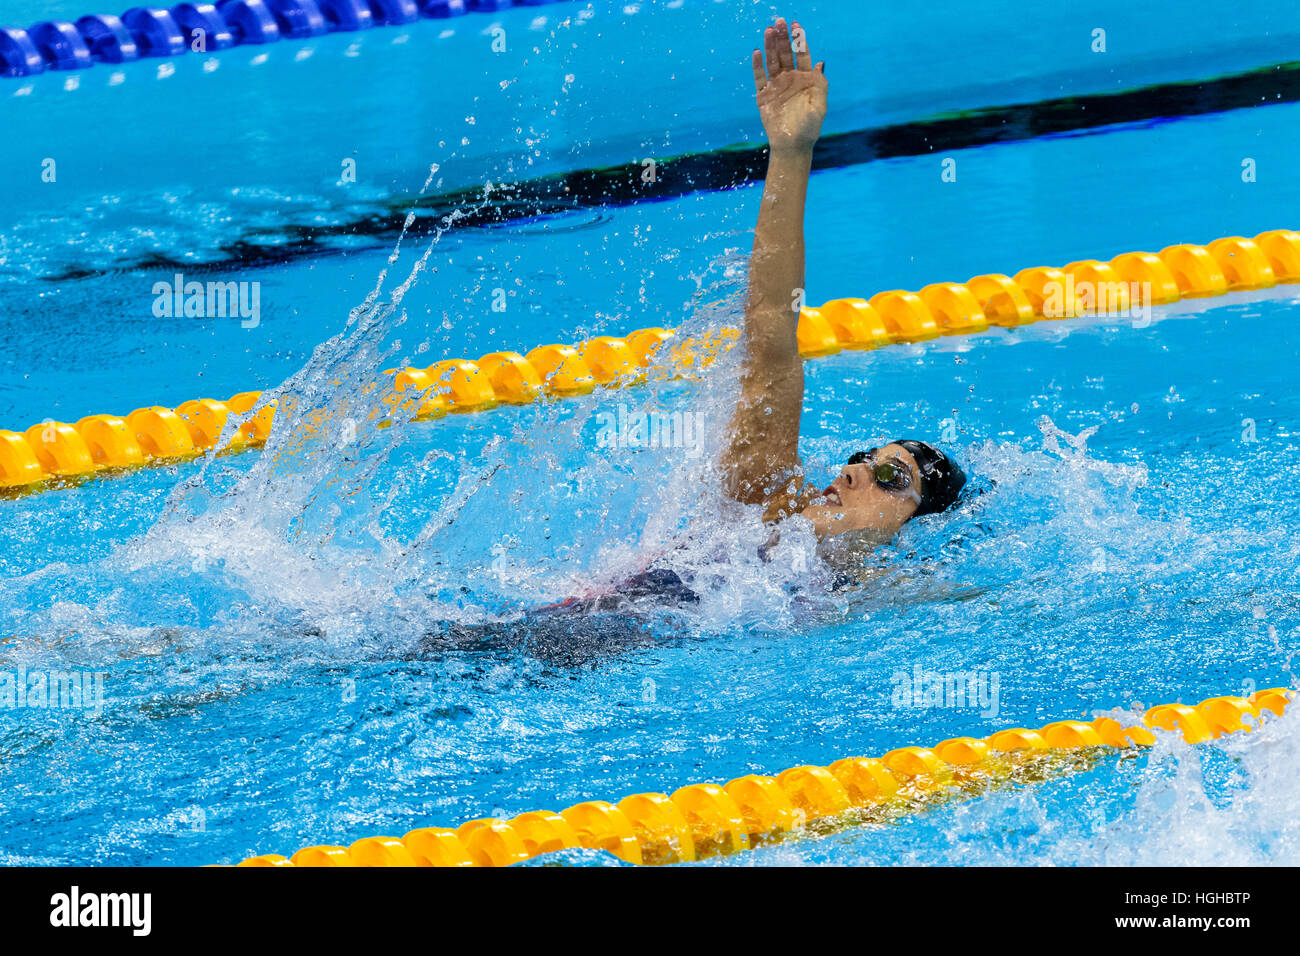 Rio de Janeiro, Brazil. 11 August 2016.  Missy Franklin (USA) competing in the women's 200m backstroke semi final at the 2016 Olympic Summer Games. ©P Stock Photo